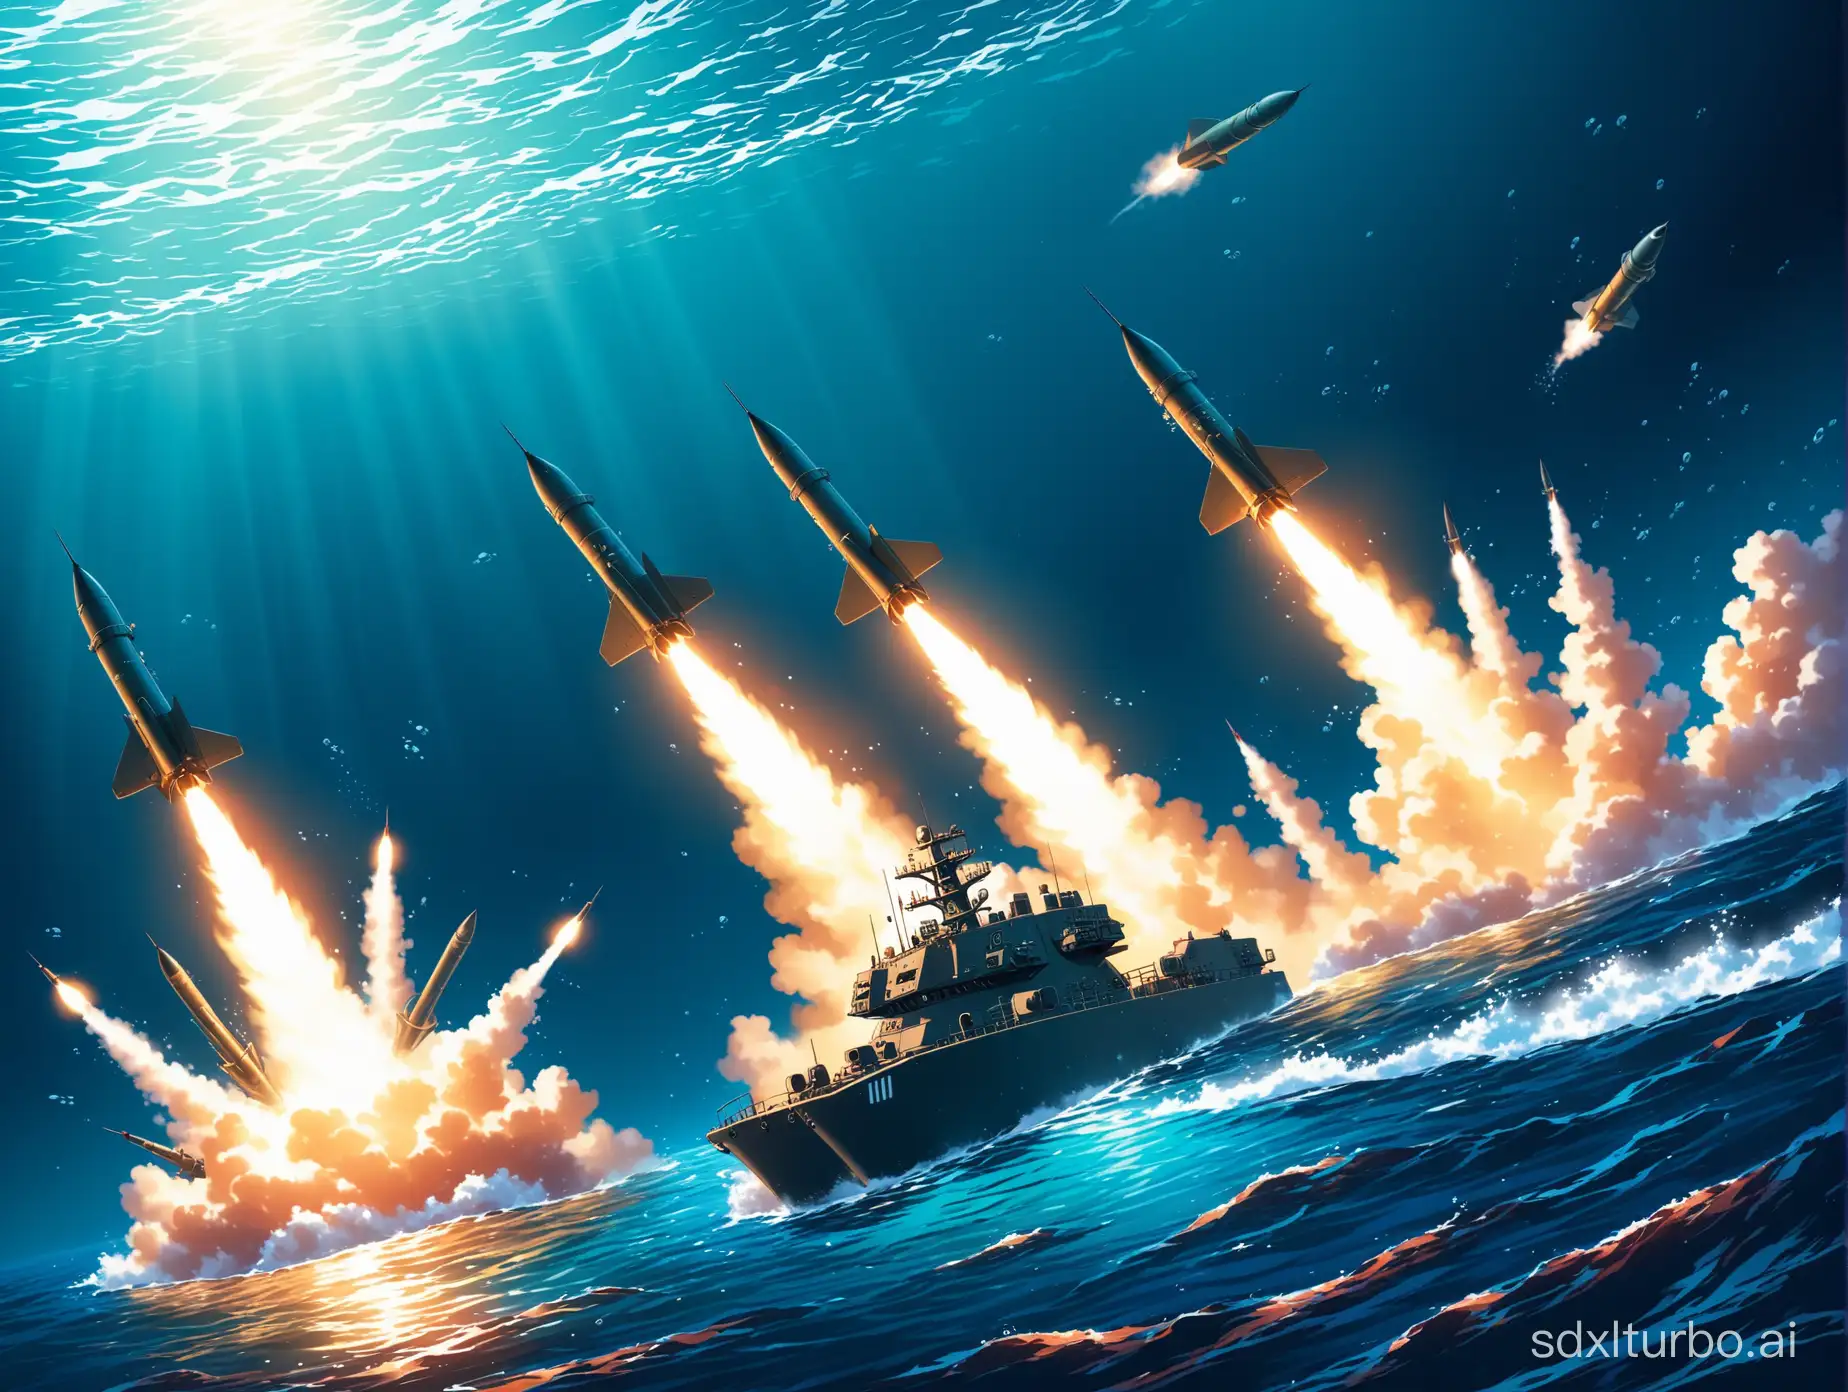 Deep sea, underwater, missiles, missile vehicles, launch
8k